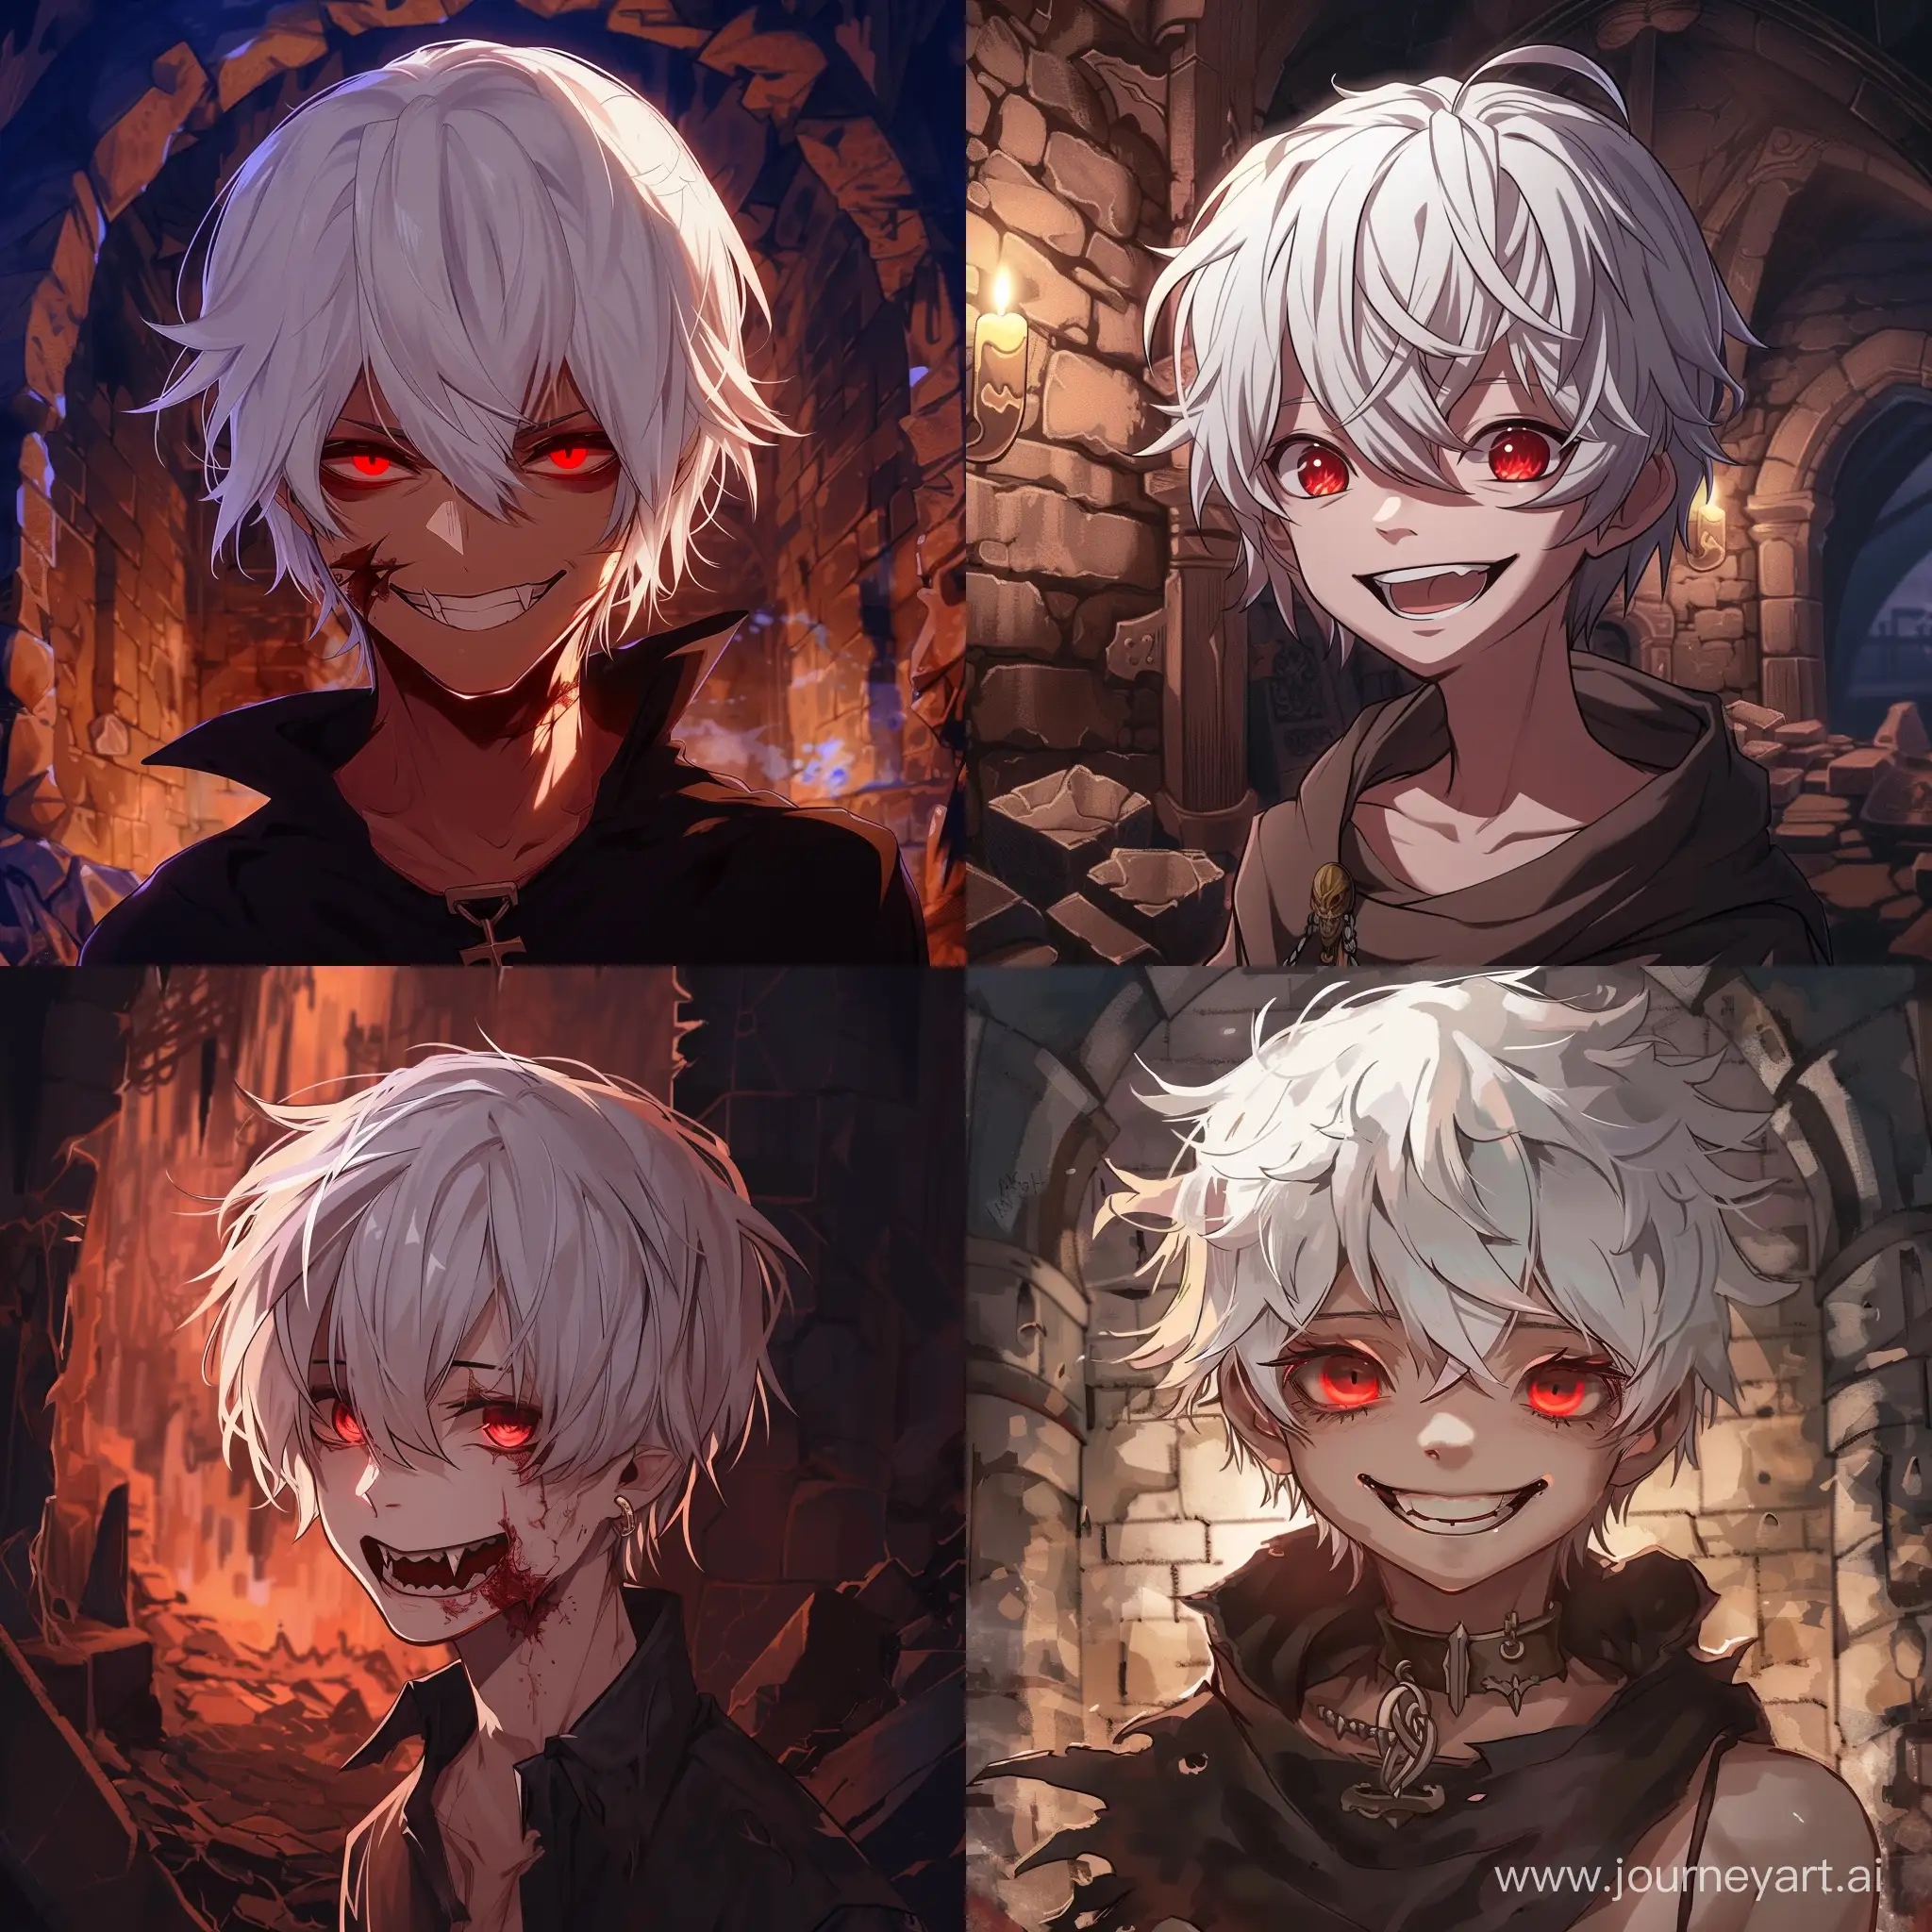 Mischievous-Anime-Boy-with-White-Hair-Grinning-in-Dungeon-Setting